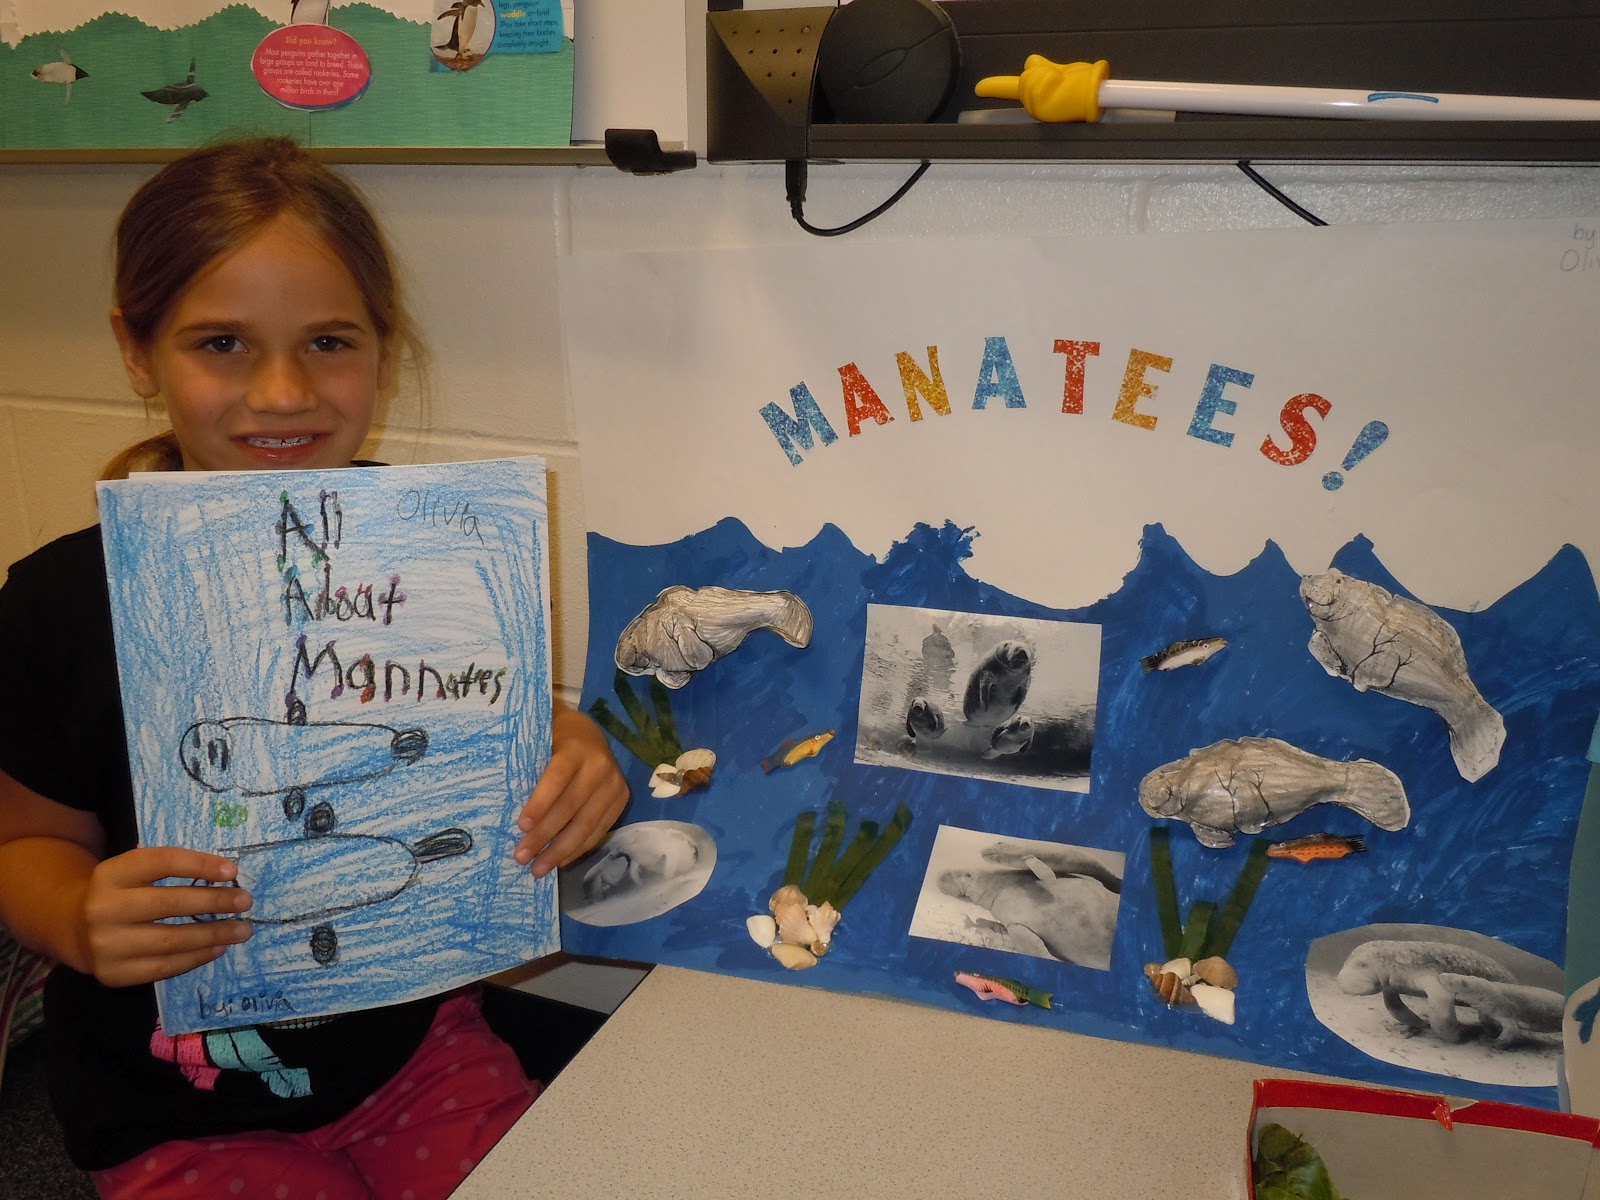 animal research projects for elementary students